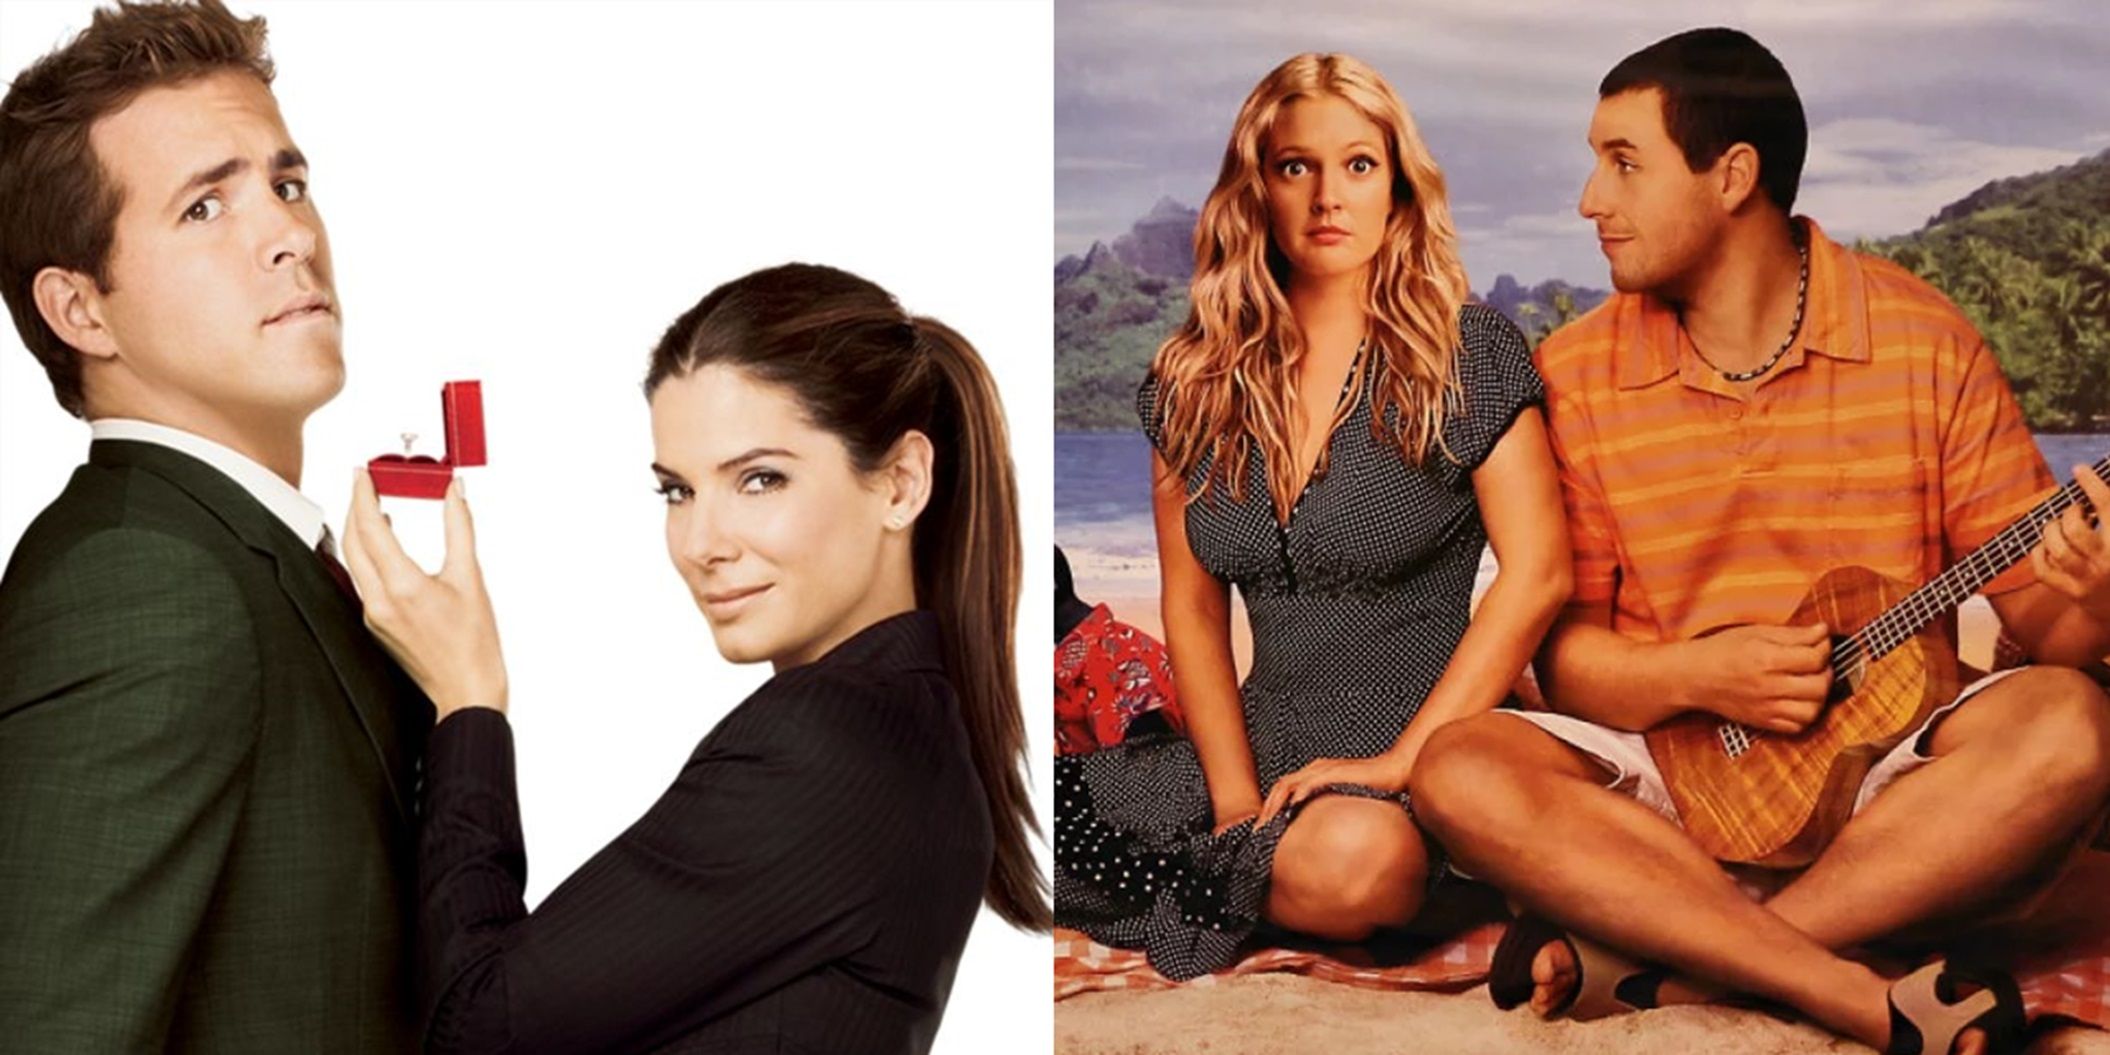 Split image of Ryan Reynolds and Sandra Bullock on The Proposal poster and Adam Sandler and Drew Barrymore on the 50 First Dates poster